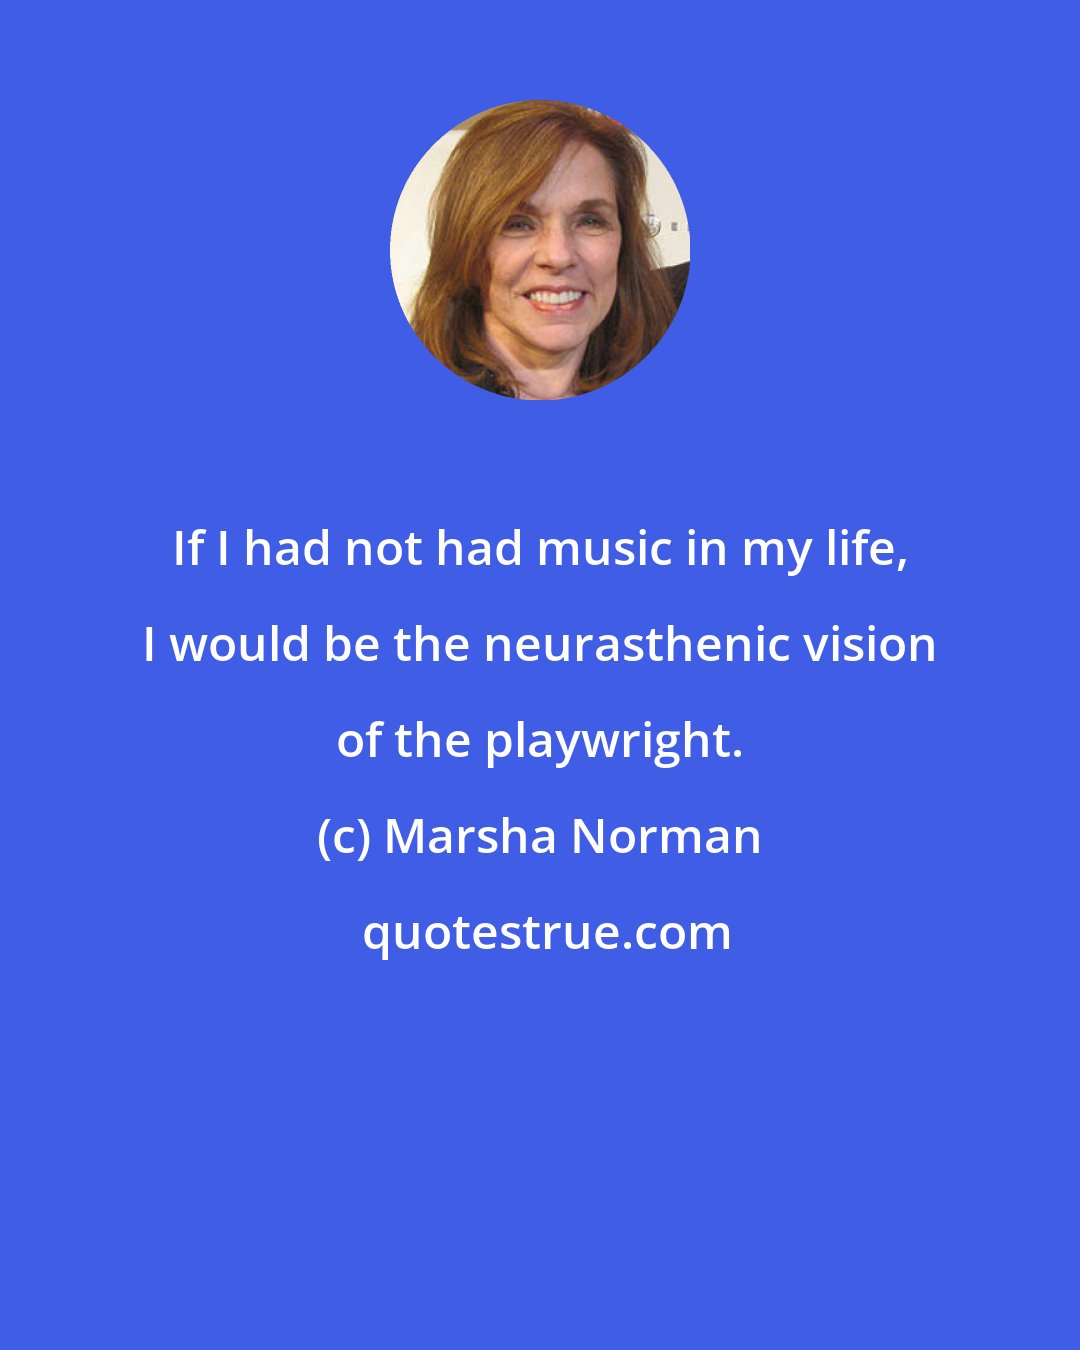 Marsha Norman: If I had not had music in my life, I would be the neurasthenic vision of the playwright.